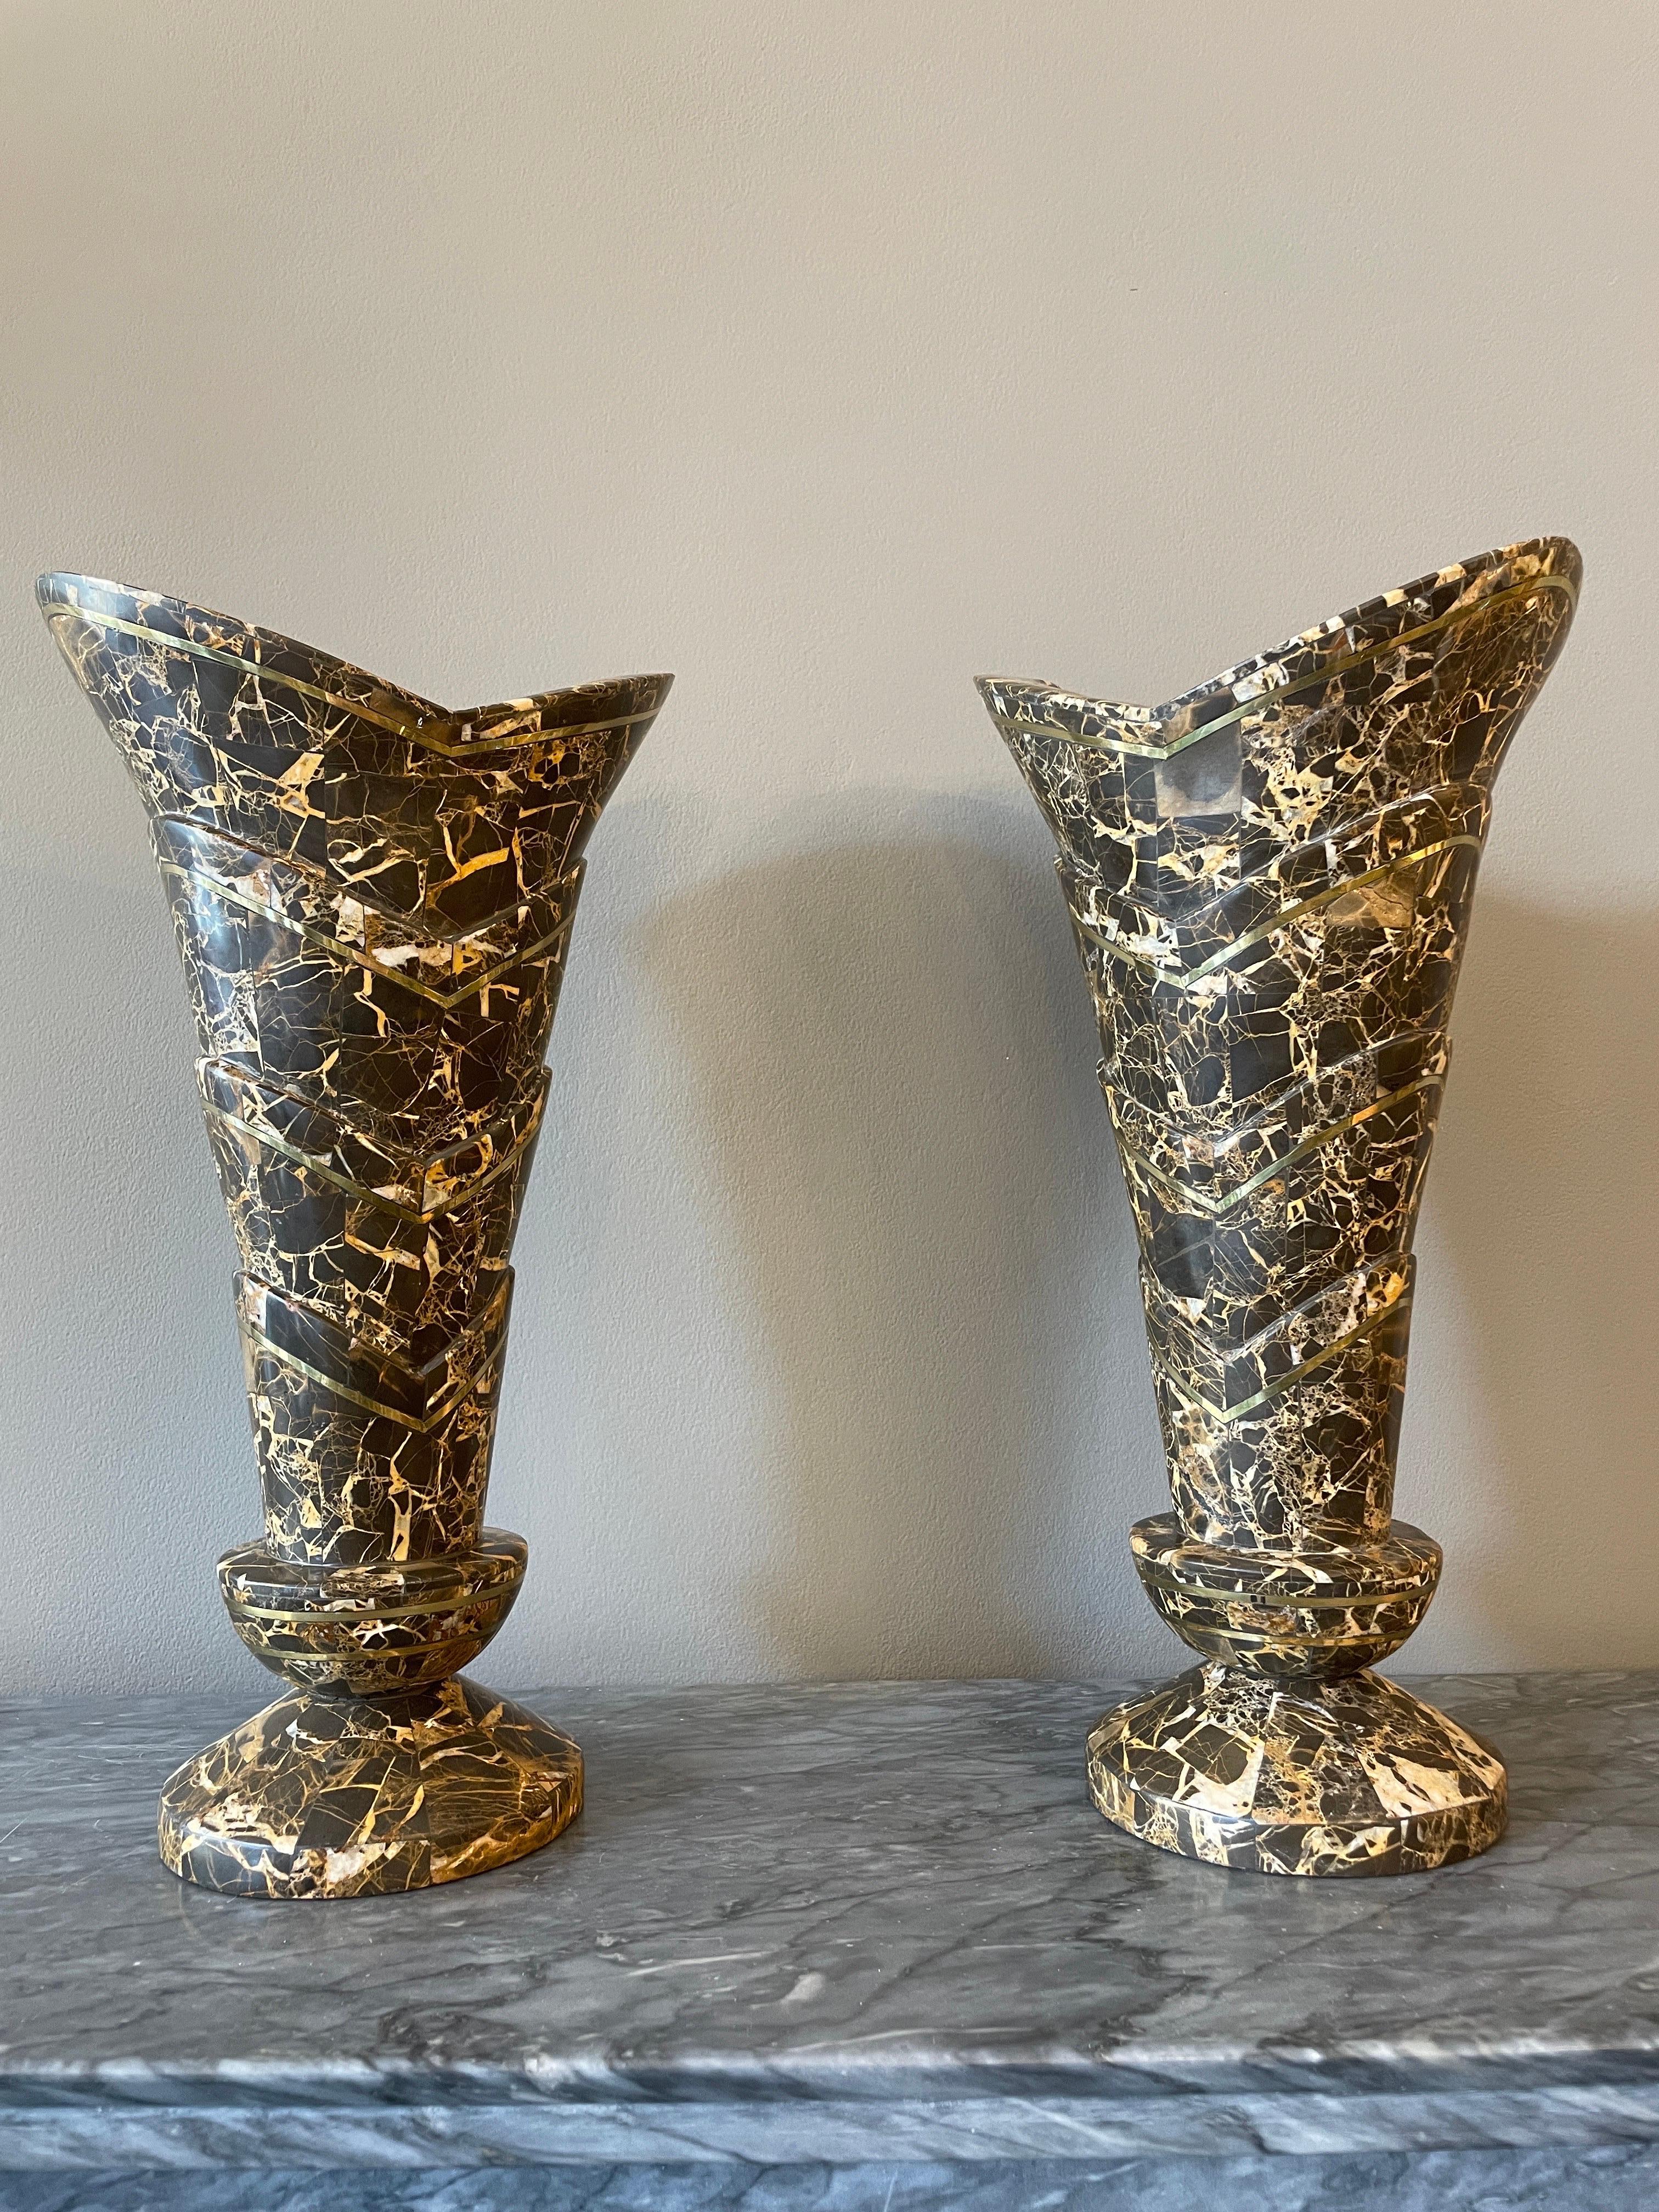 A pair of tessellated marble with brass inlay vases by Maitland Smith. 
A very elegant and stylised pair with stepped design with brass banded inlay. 
Good size and scale. In Portoro black and gold marble. Images a true reflection of condition and